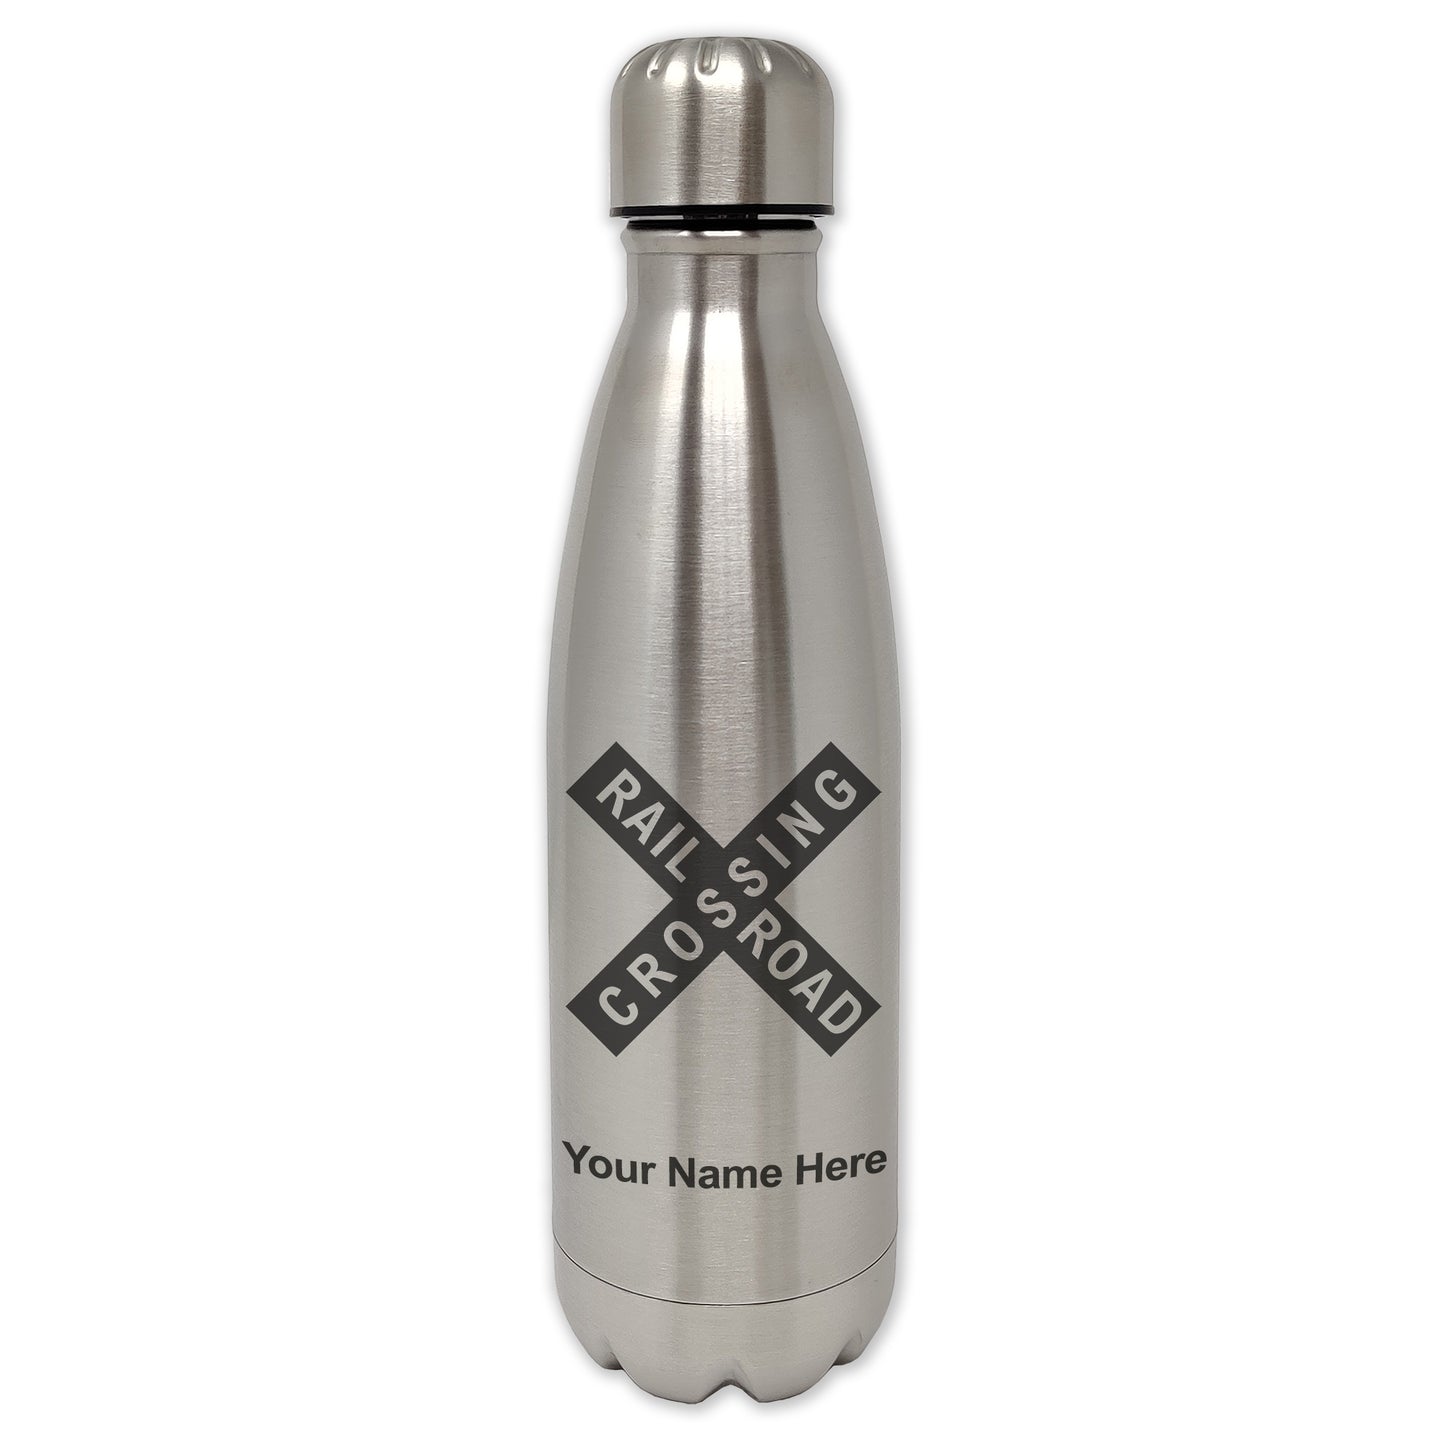 LaserGram Single Wall Water Bottle, Railroad Crossing Sign 1, Personalized Engraving Included